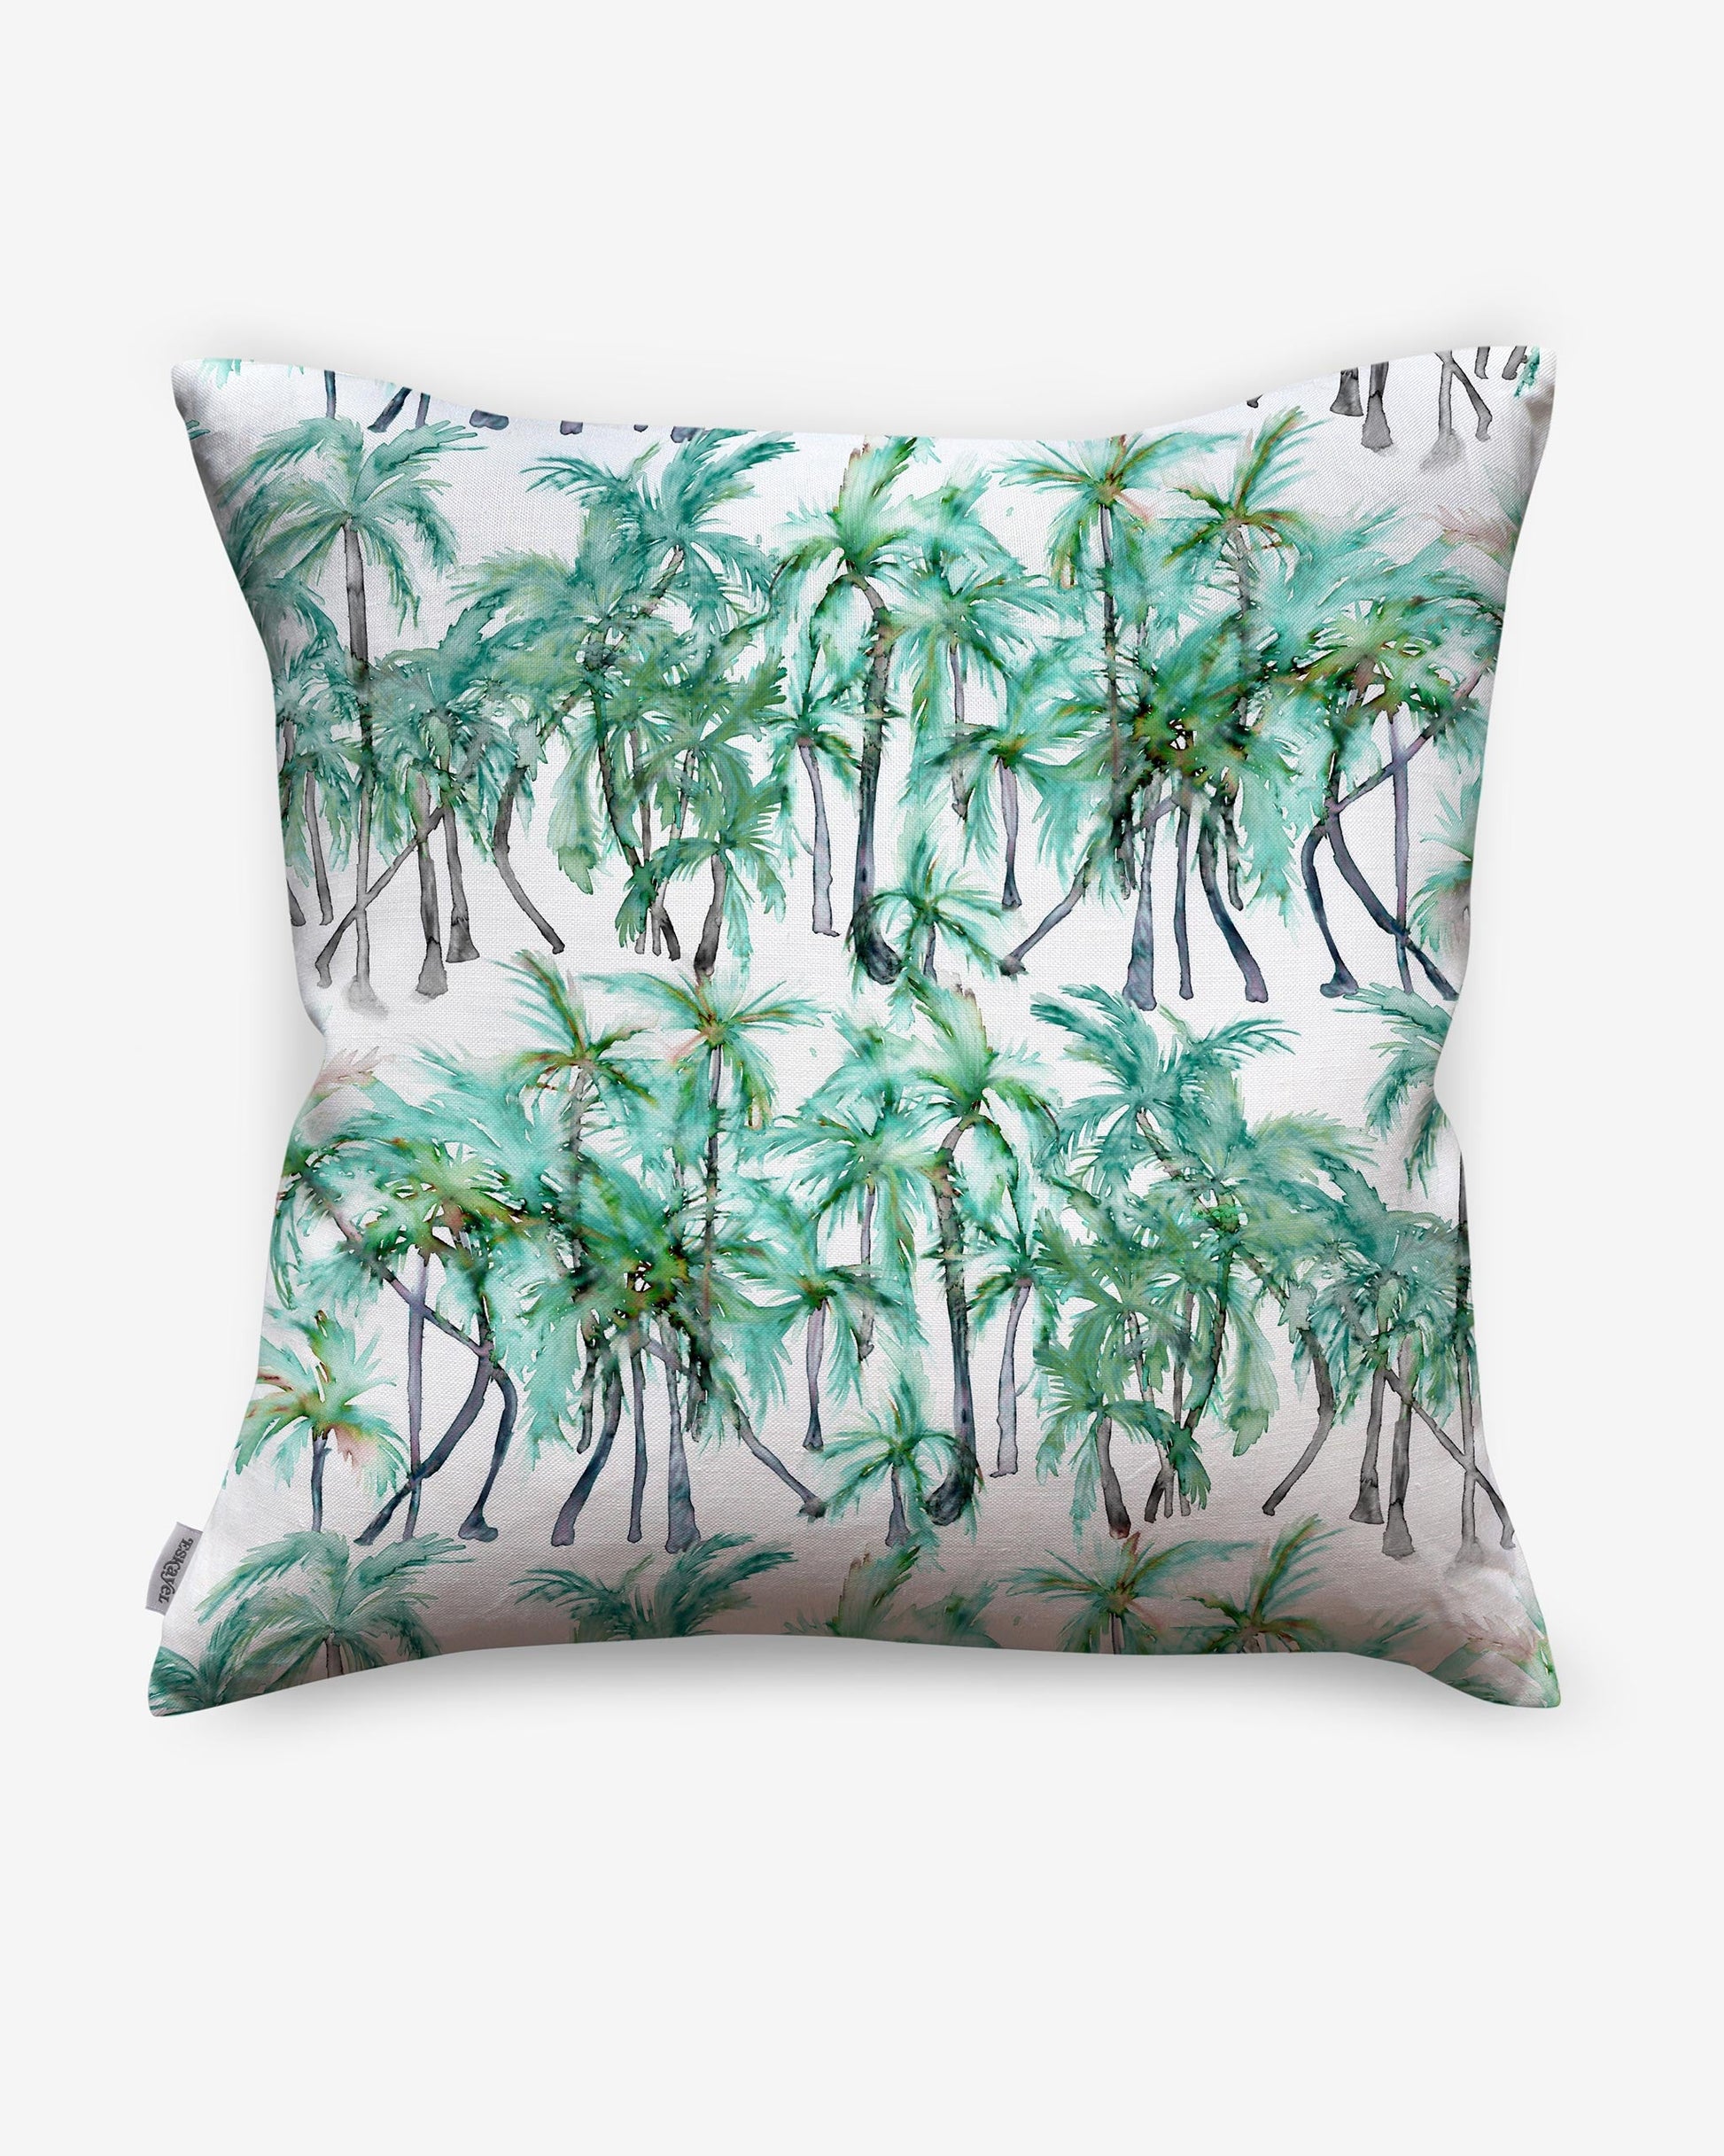 A Palm Dance Pillow||Pool, a luxury fabric pillow with a watercolor pattern of palm trees on it.